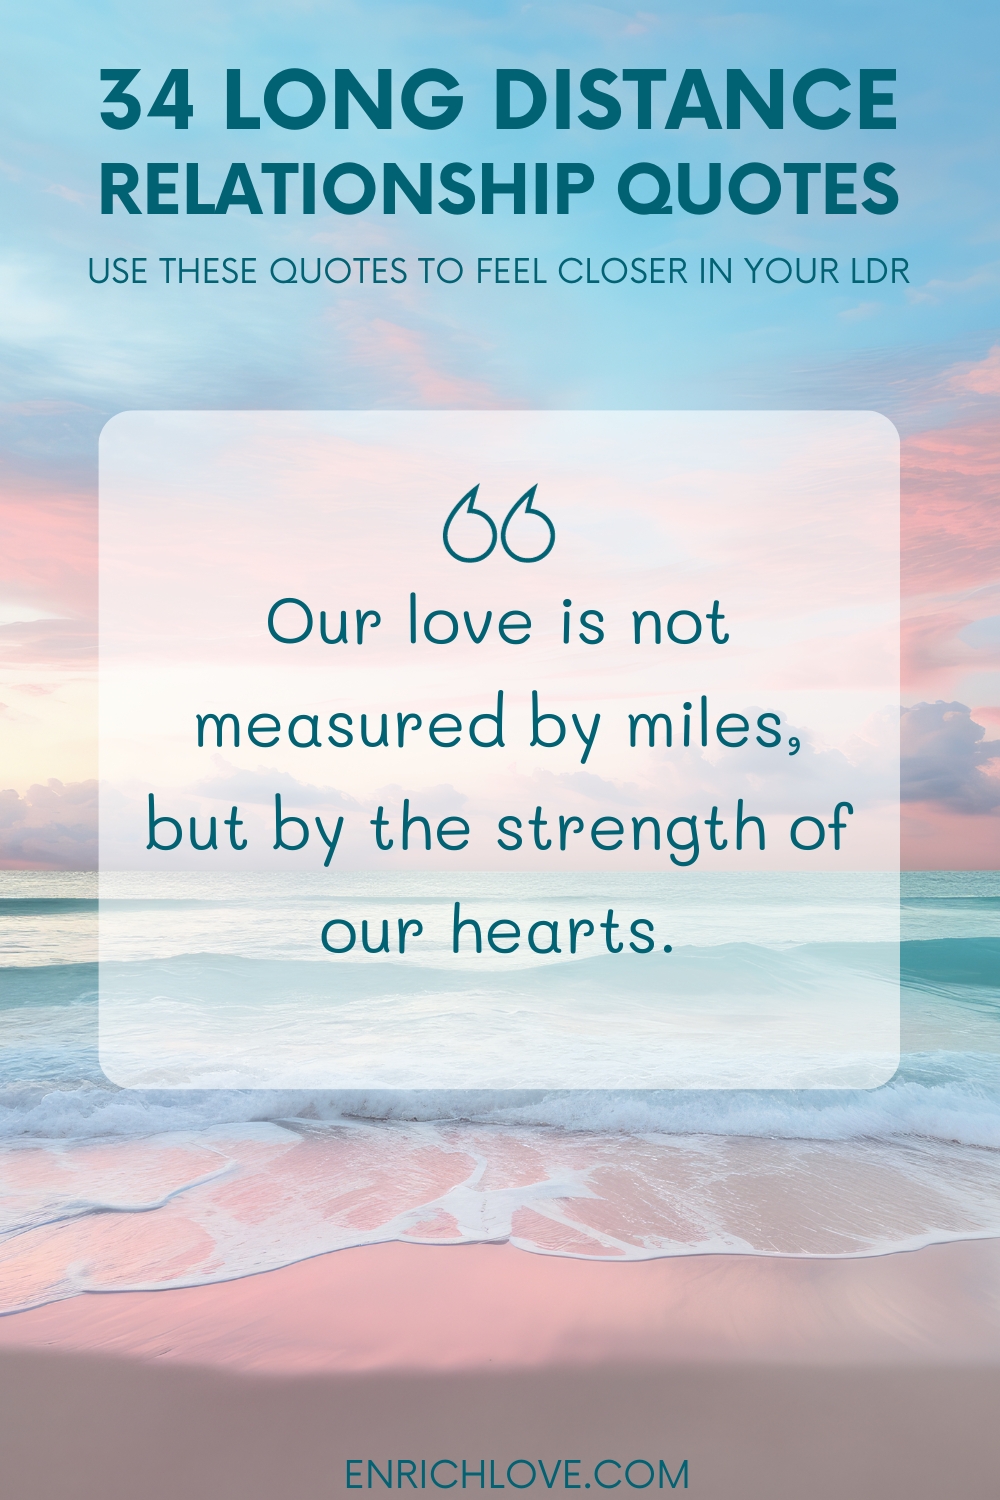 34 Long Distance Relationship Quotes - Our love is not measured by miles, but by the strength of our hearts.